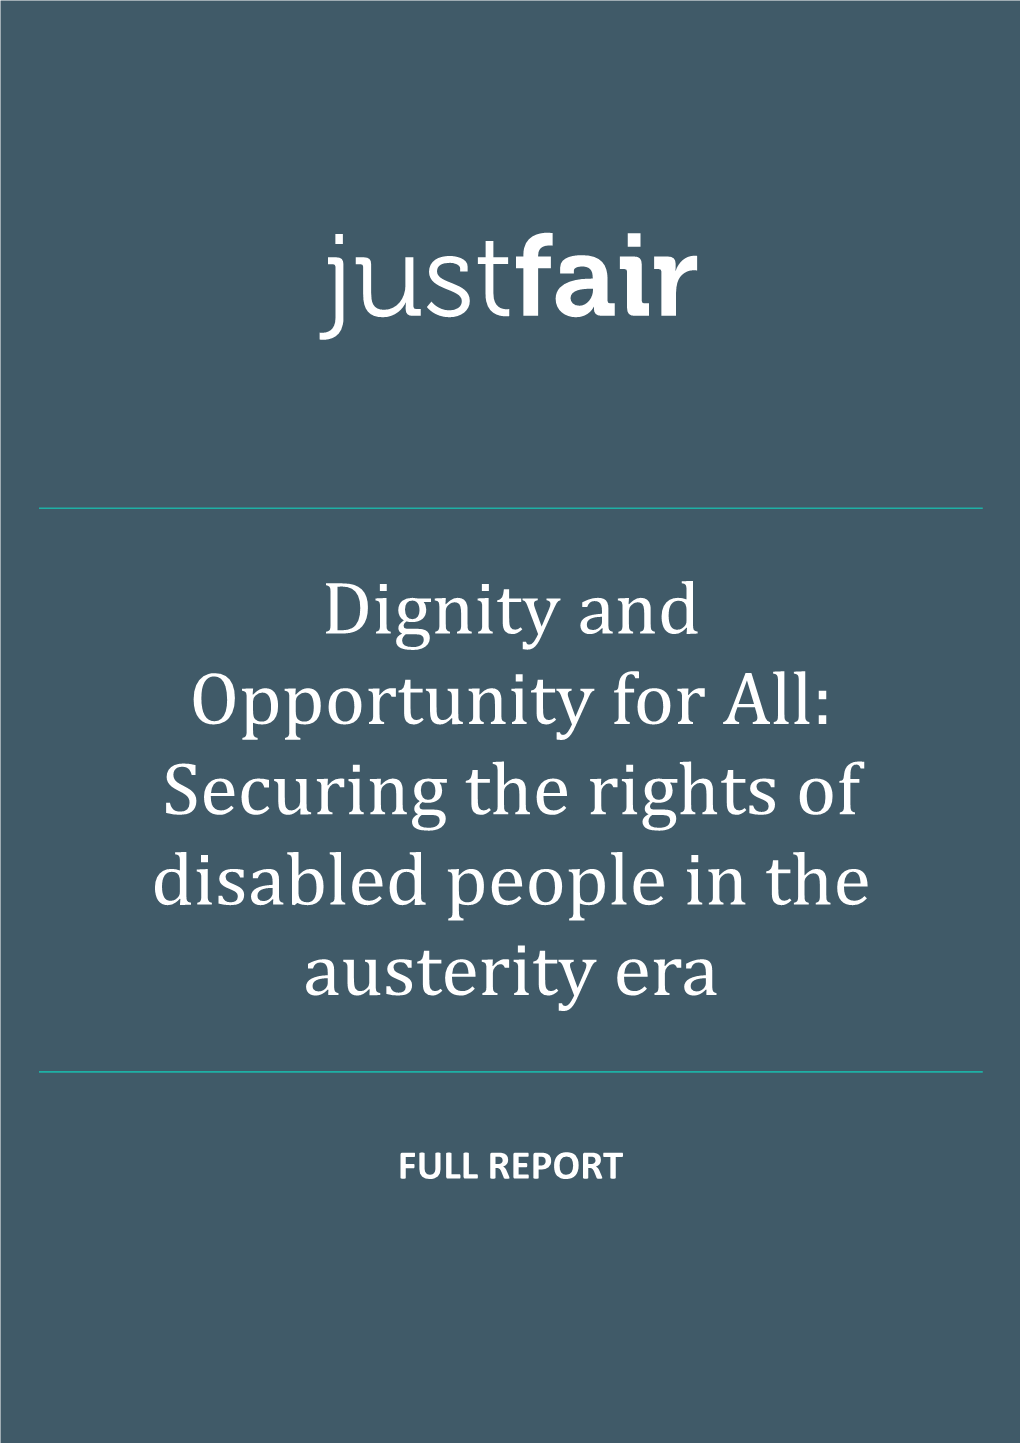 Dignity and Opportunity for All: Securing the Rights of Disabled